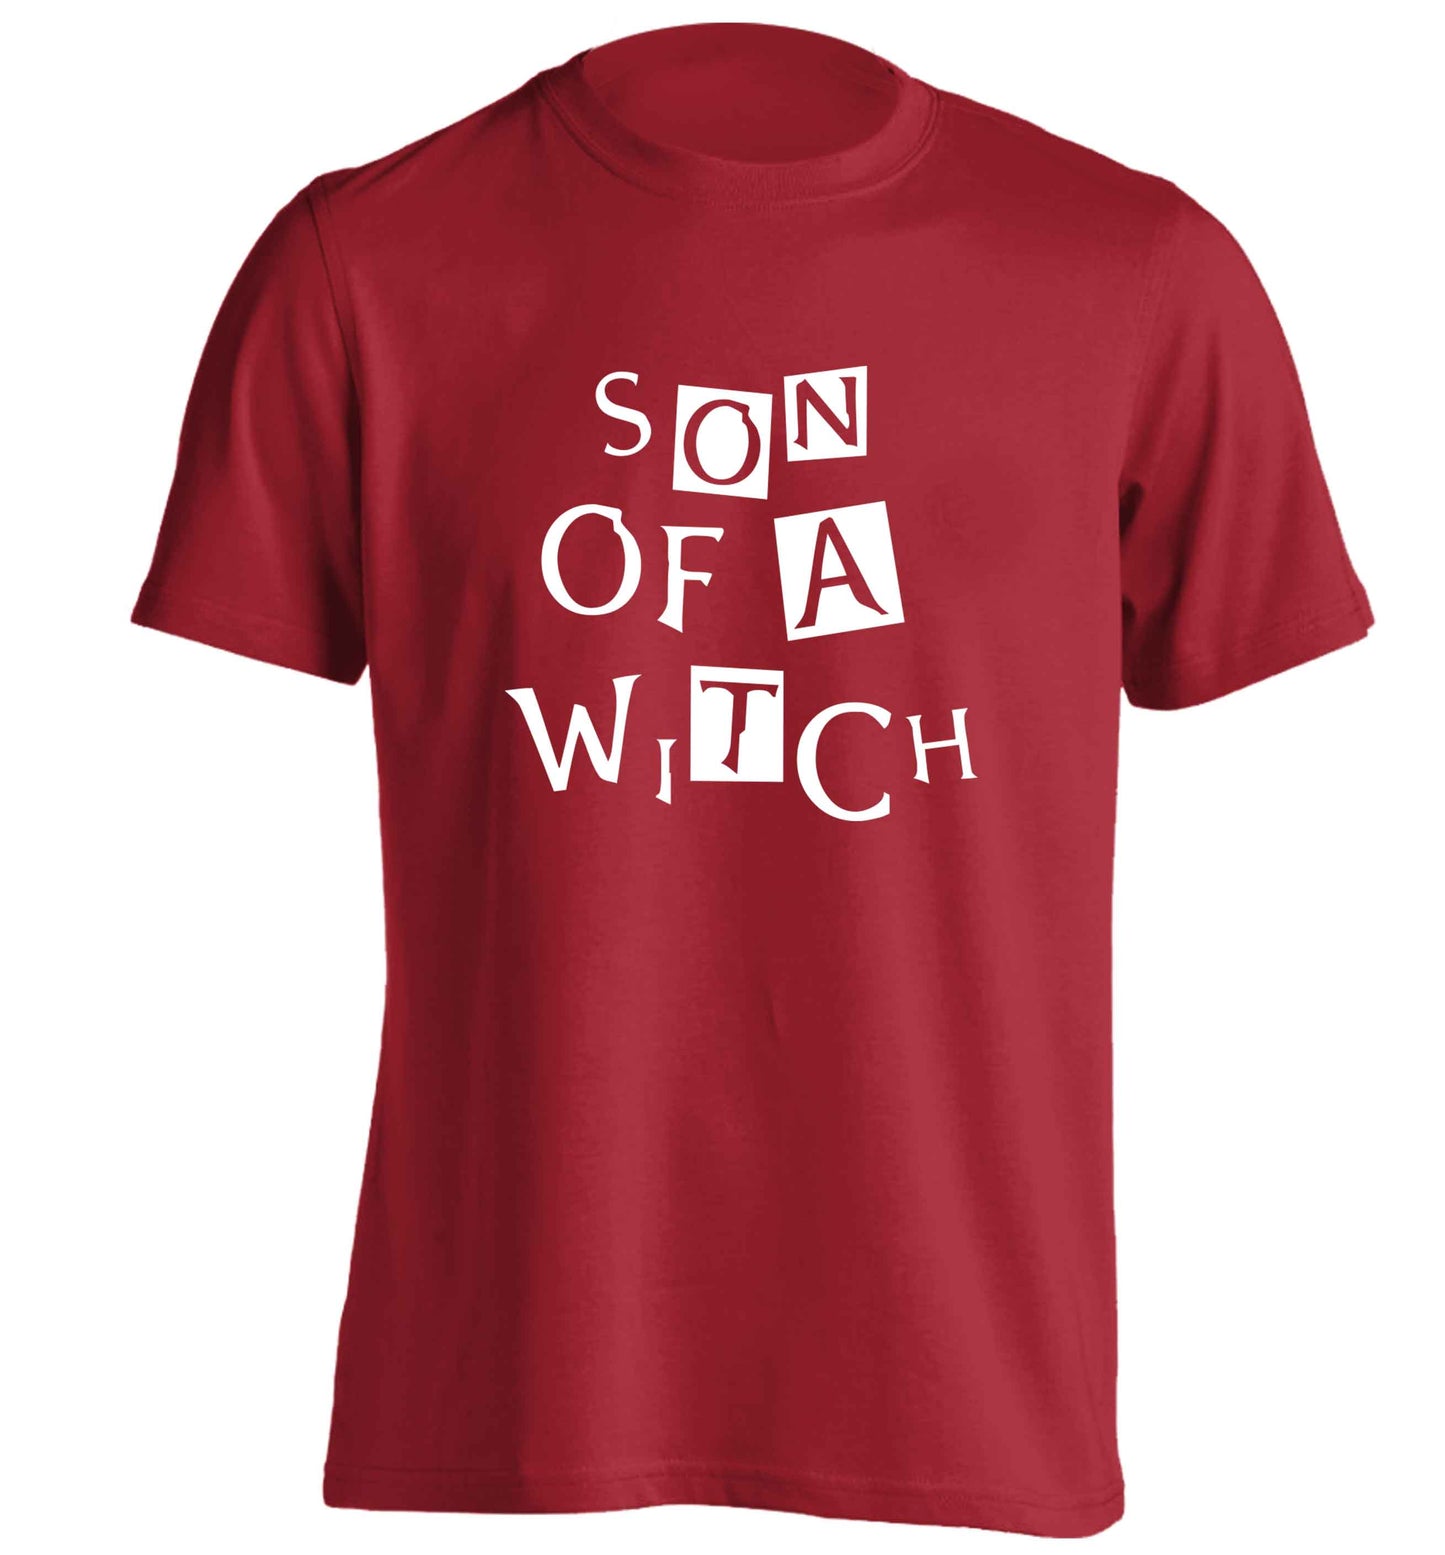 Son of a witch adults unisex red Tshirt 2XL